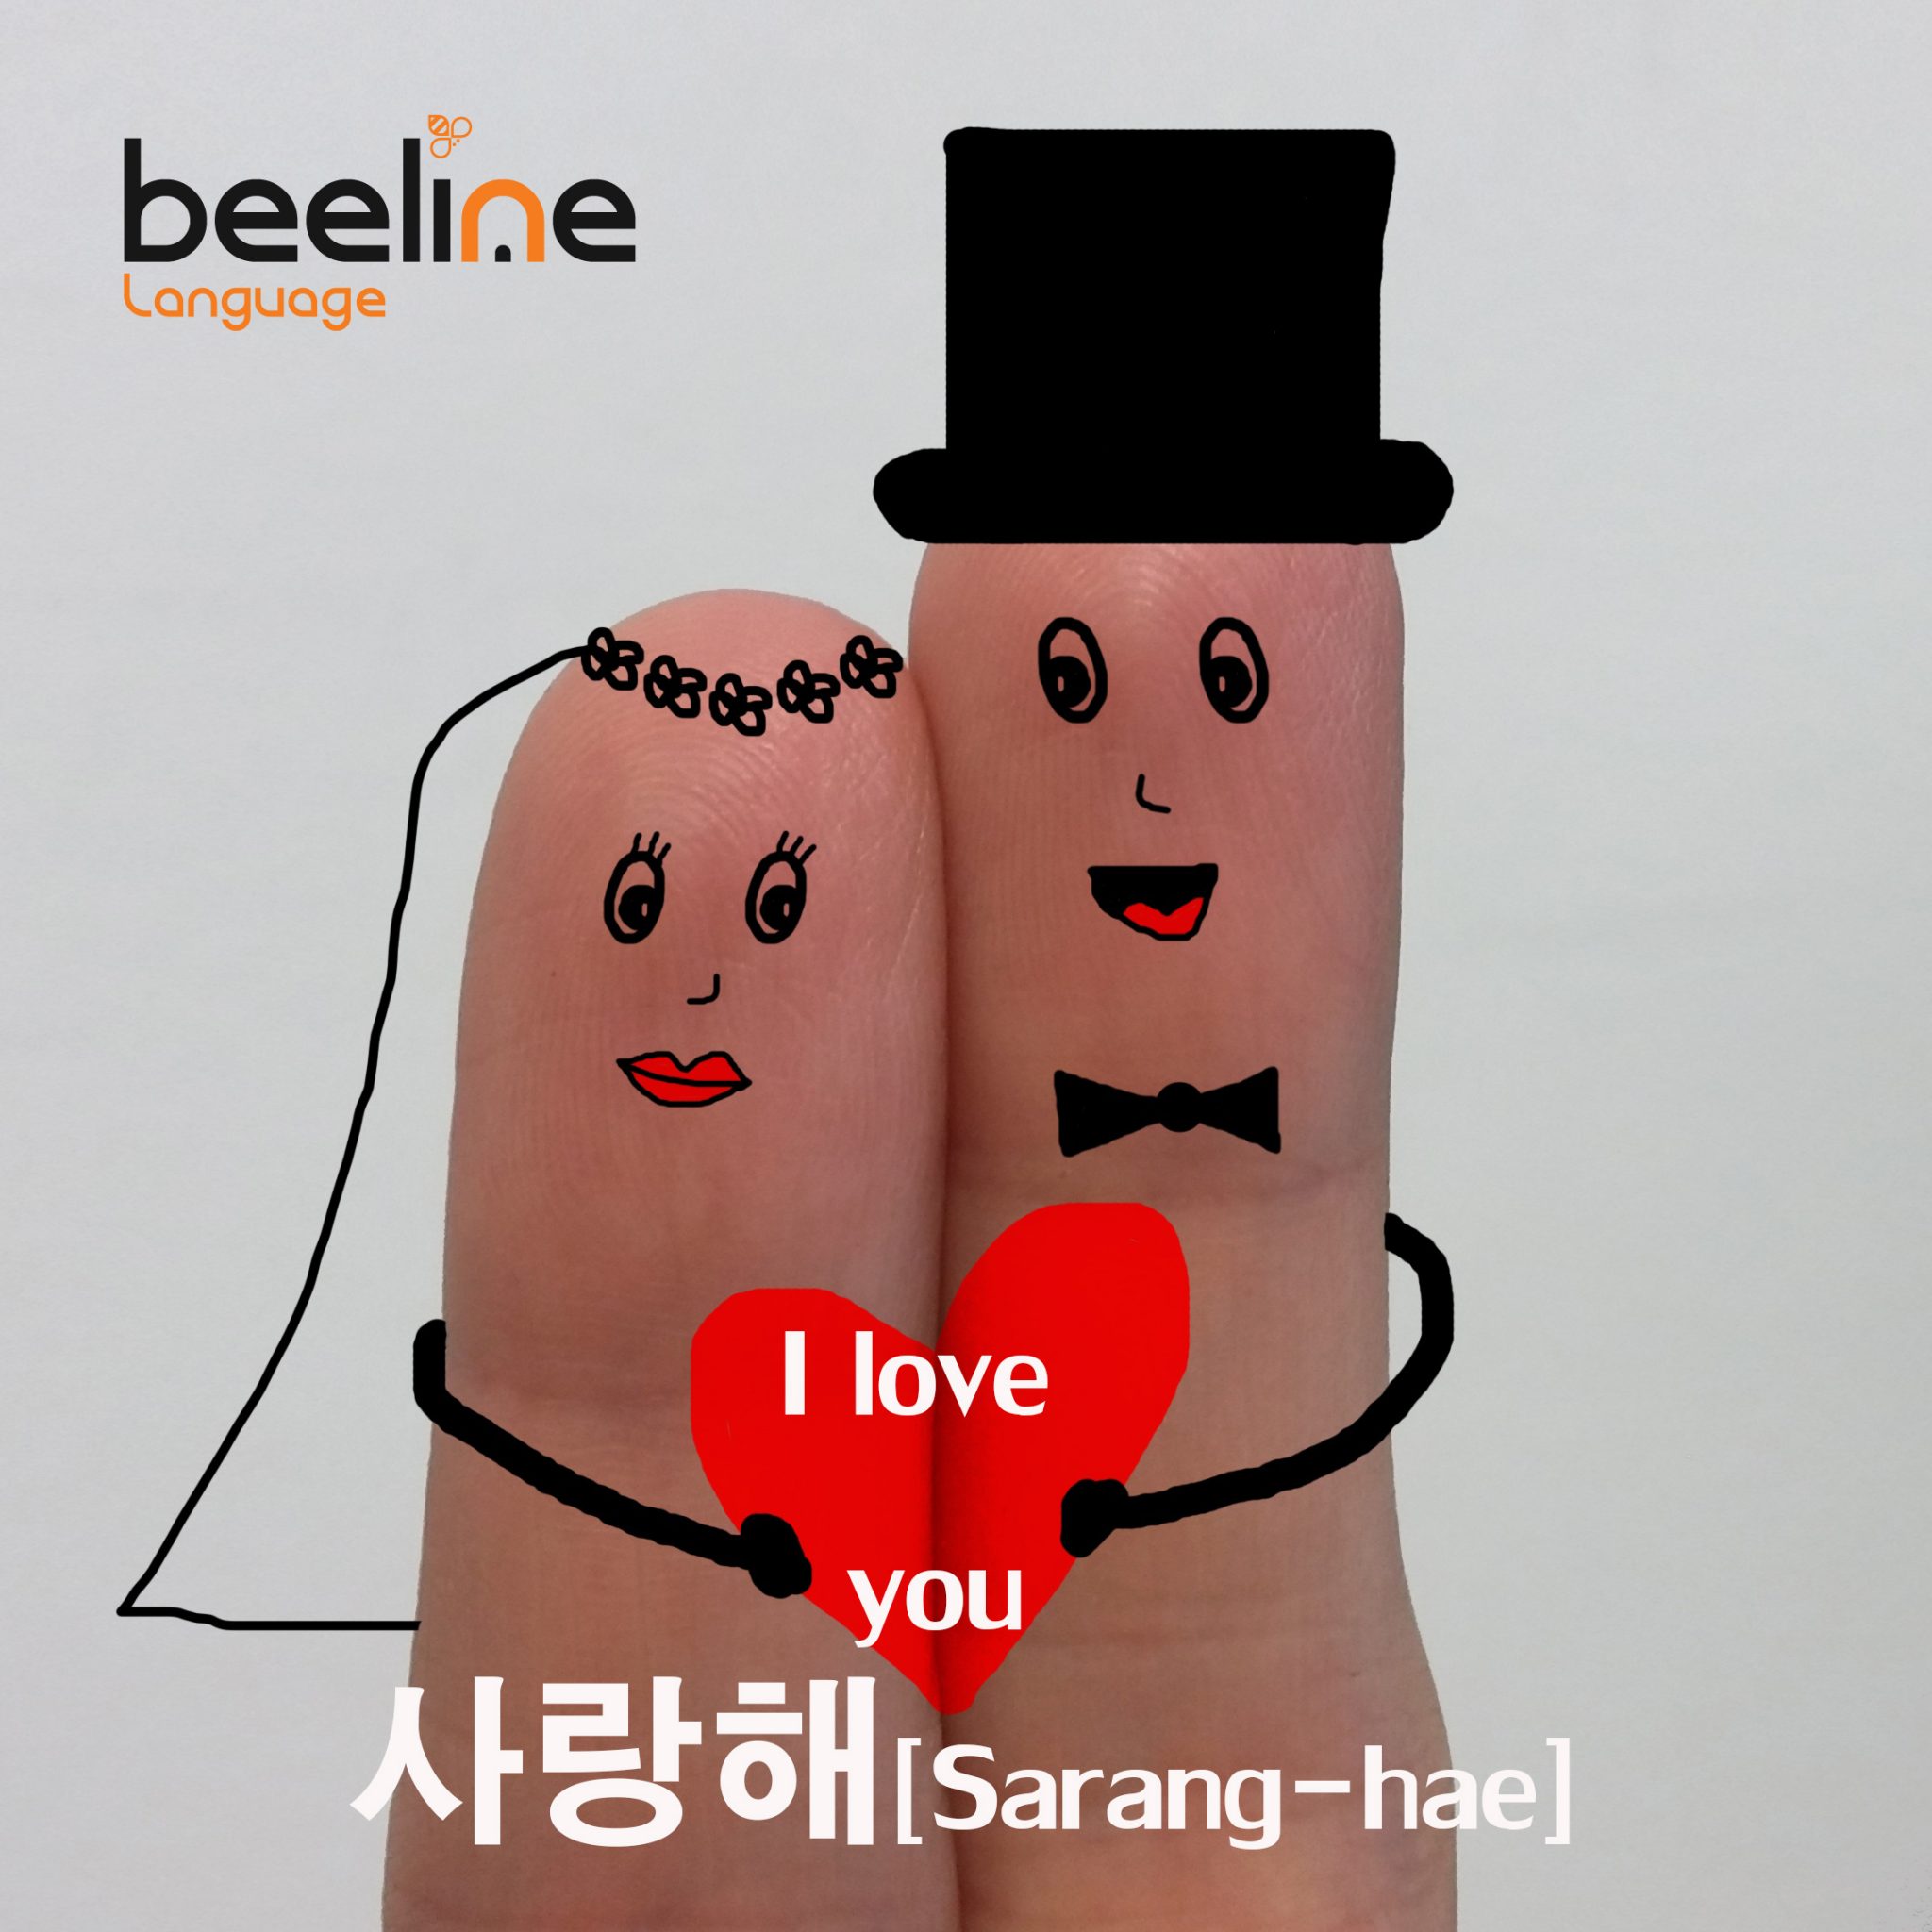 how to say I love you in Korean